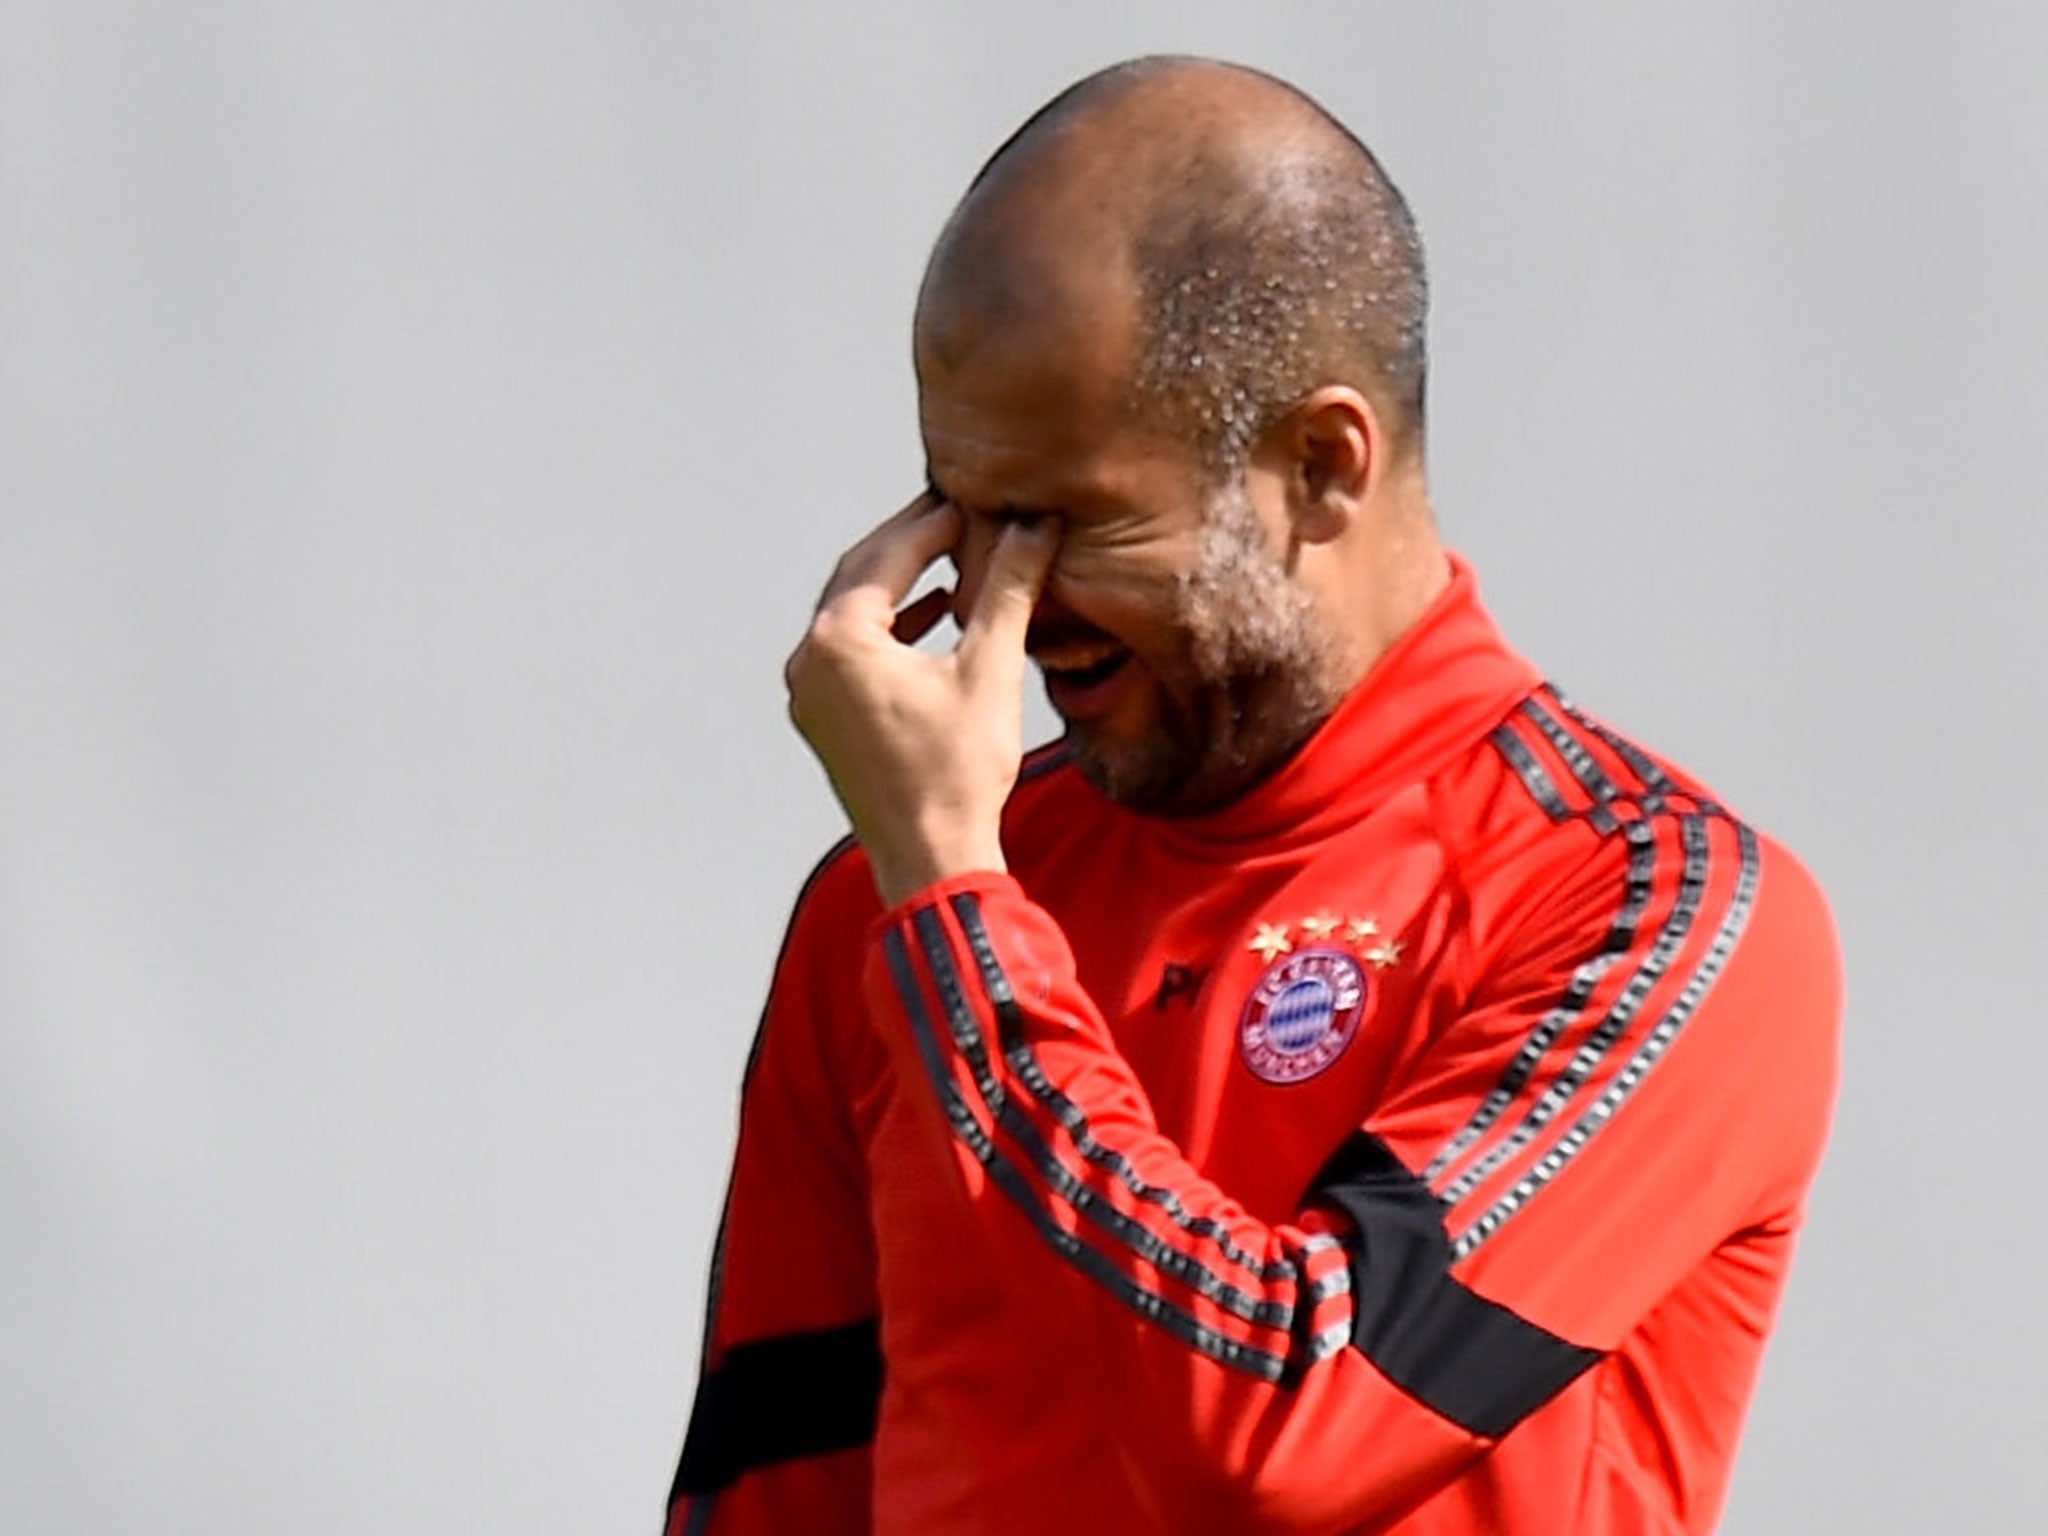 Pep Guardiola looks pained during Bayern Munich’s training session